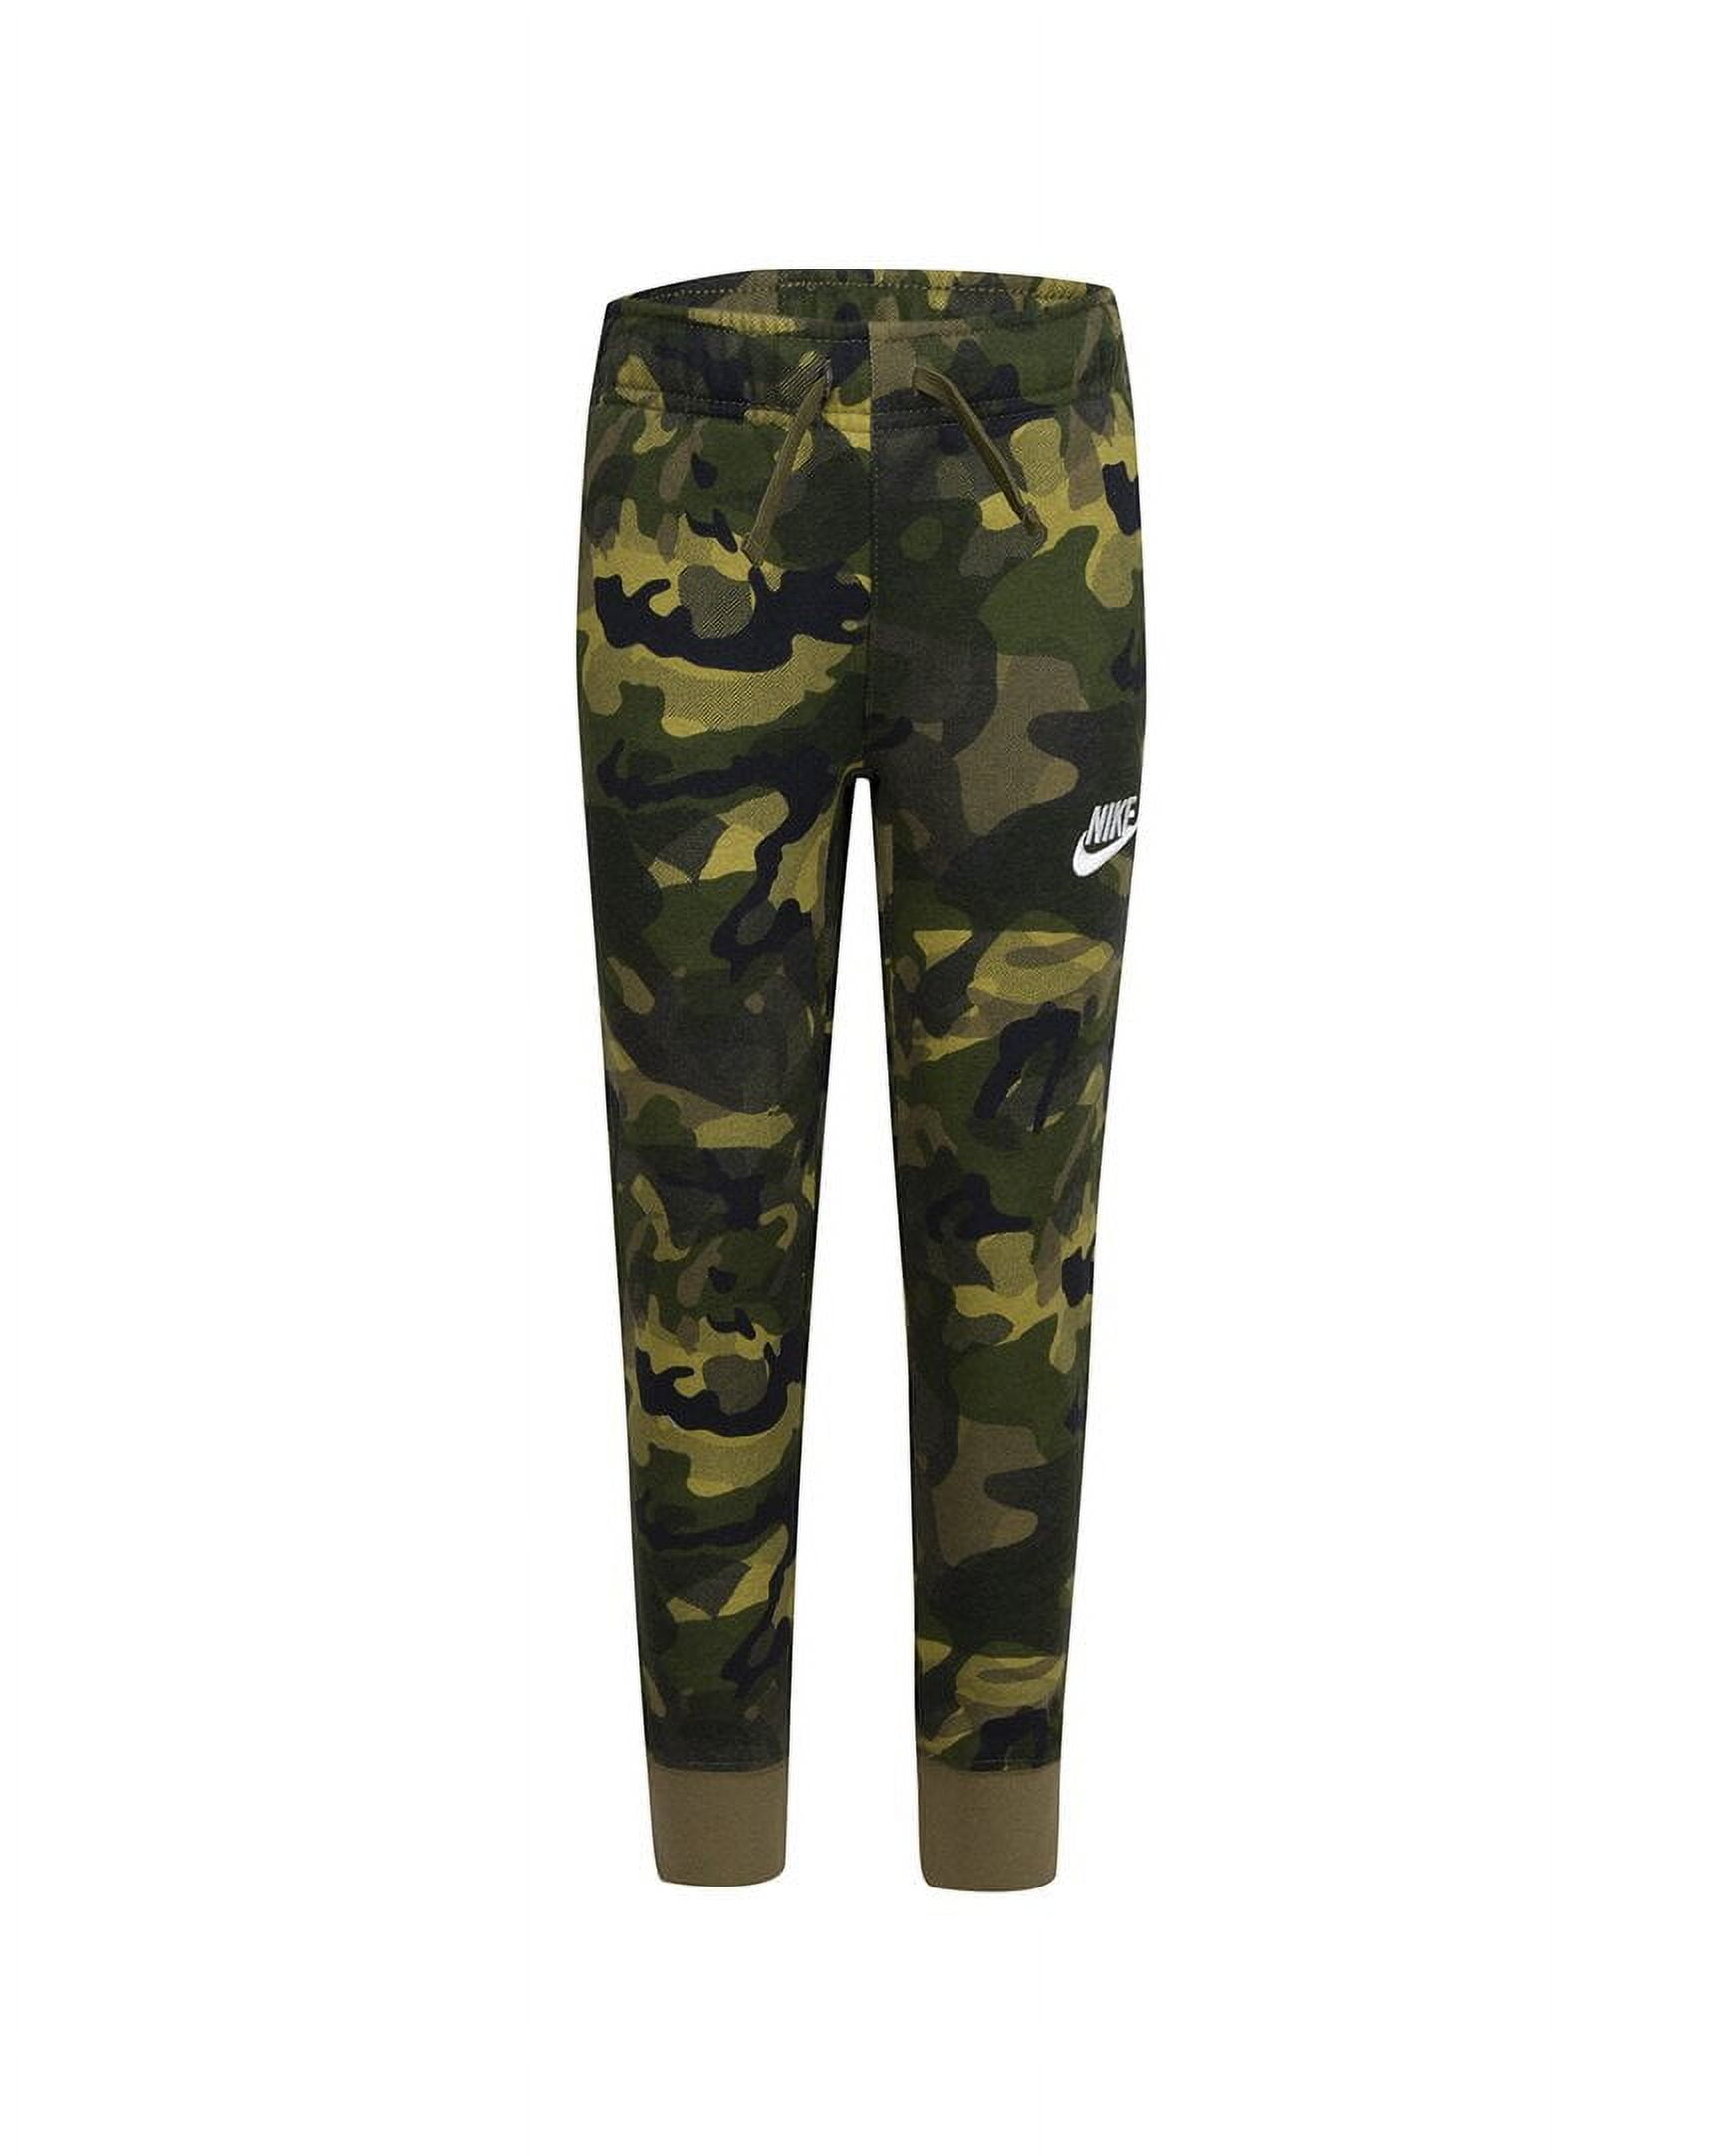 Girls Woven Pull On Camo Jogger Pants | The Children's Place - PINK TINGE